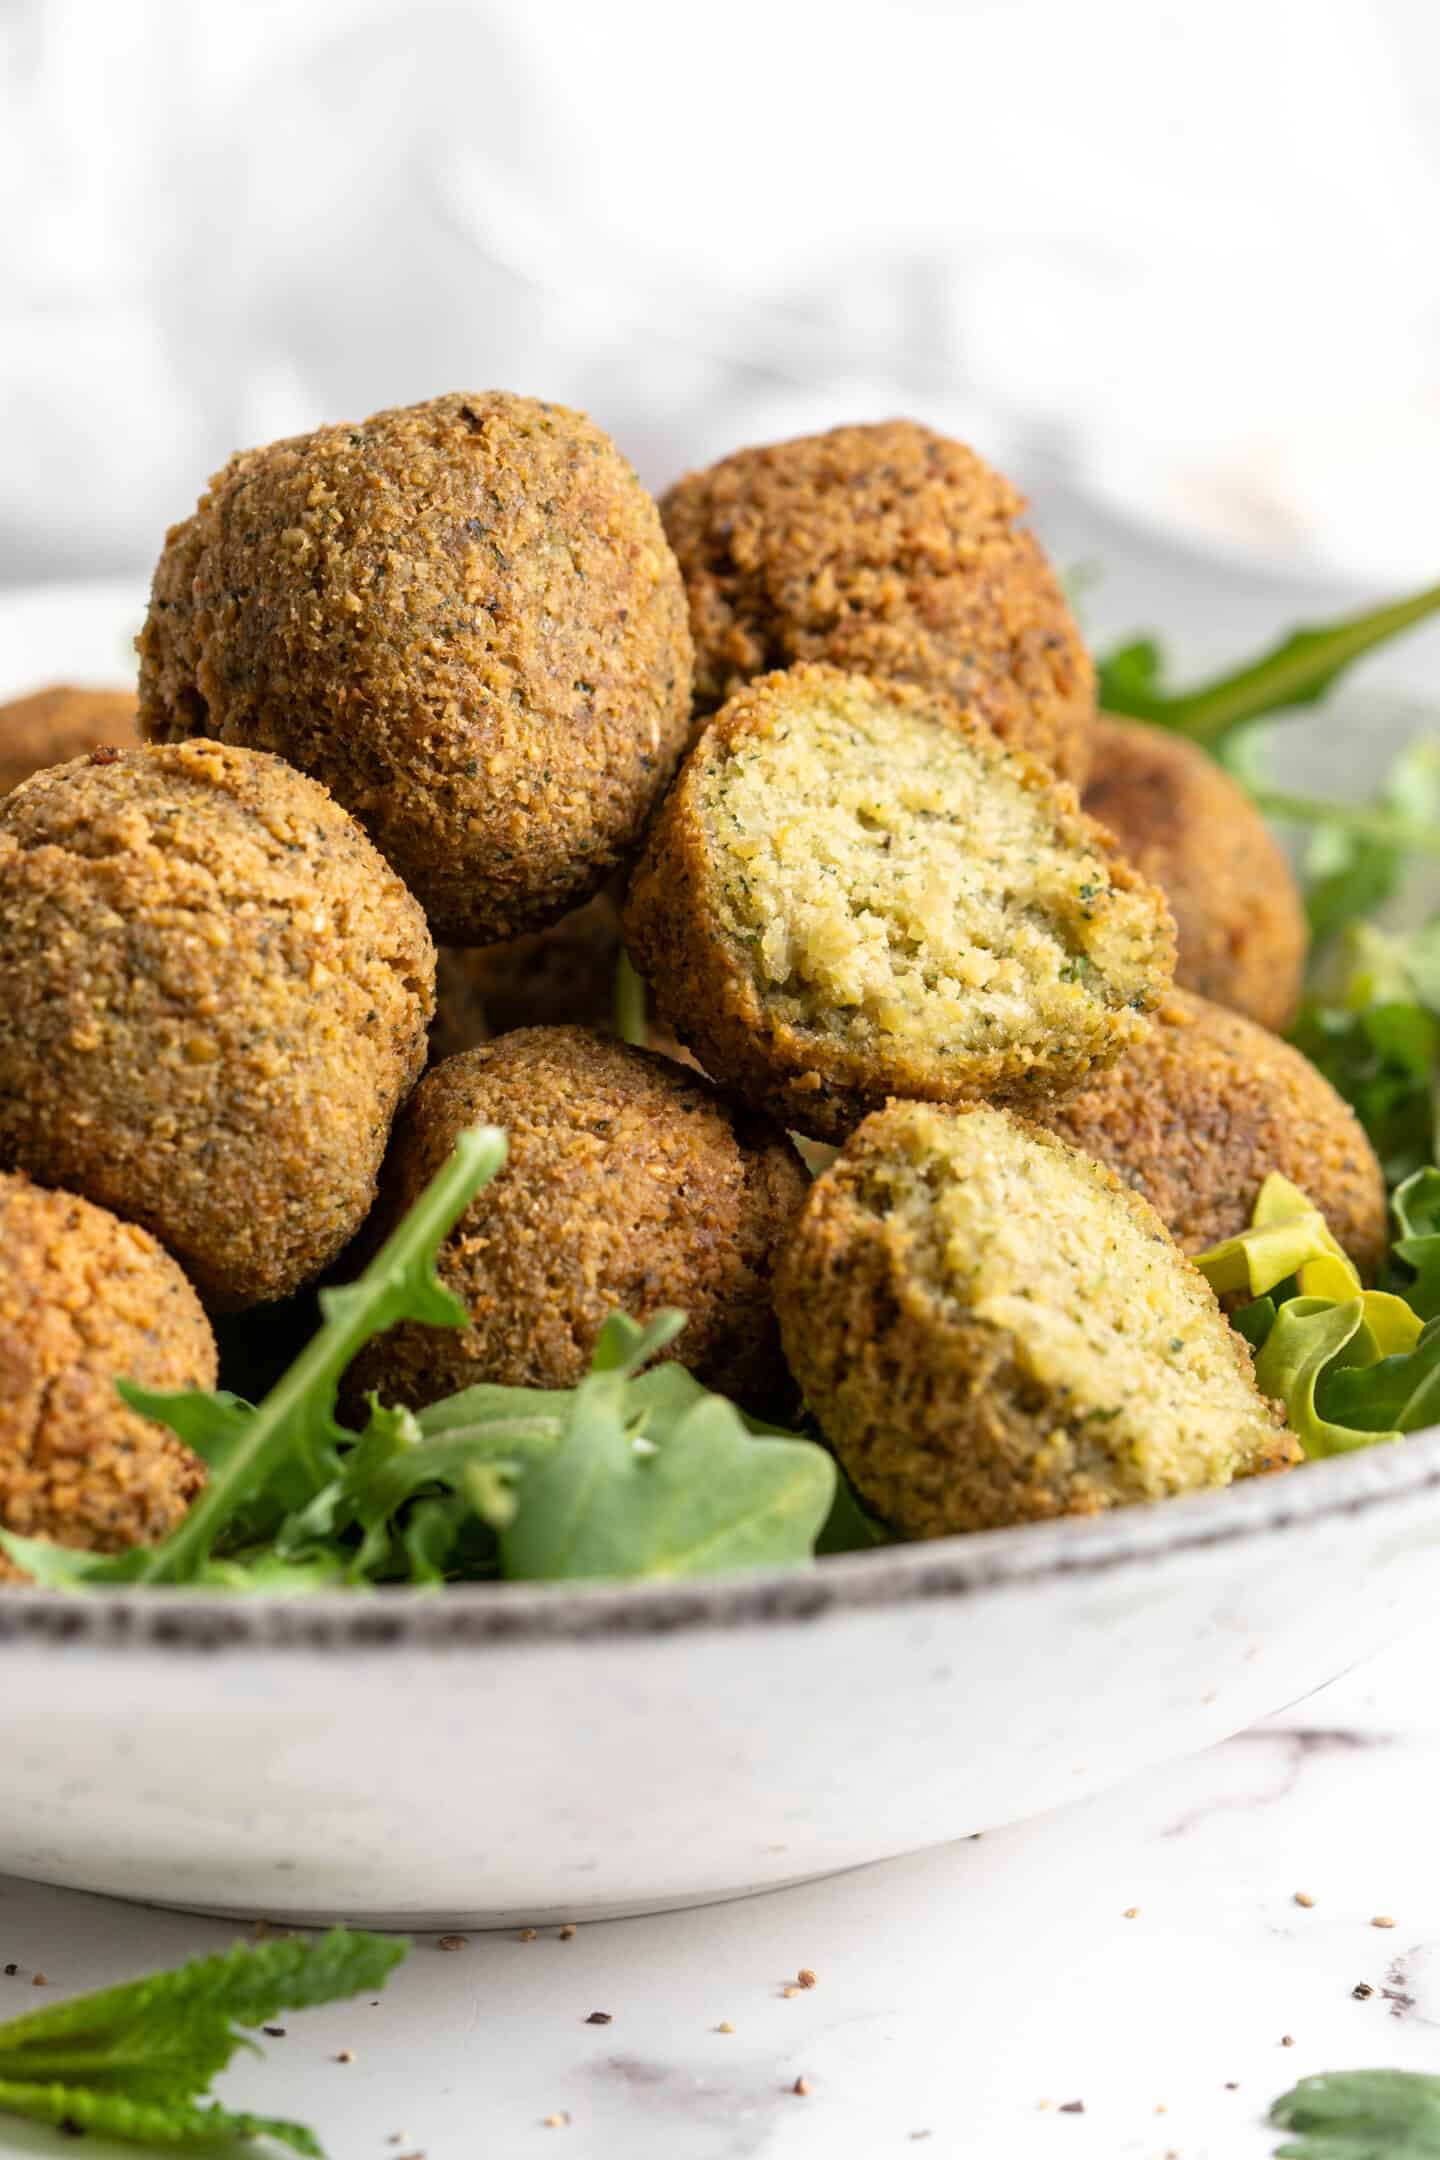 Closeup of falafel in bowl with greens, with one cut open to show fluffy inside